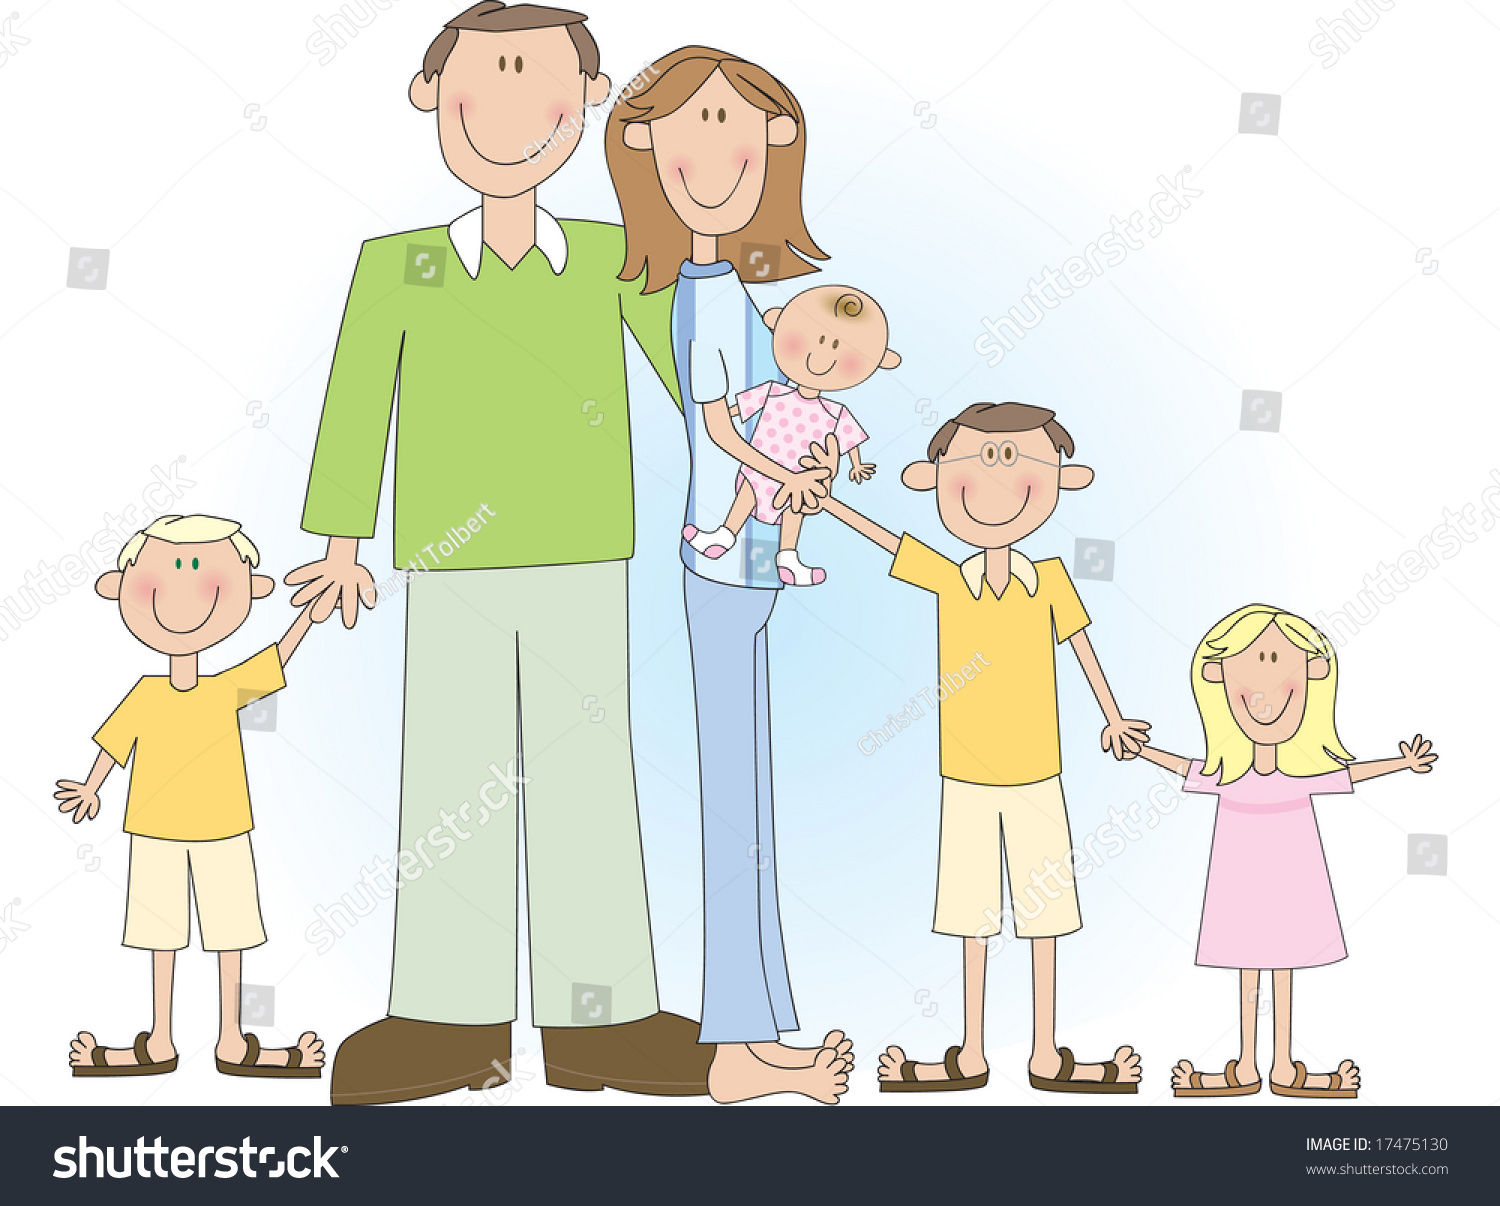 A Cartoon Vector Drawing Of A Large Family Including Father, Mother